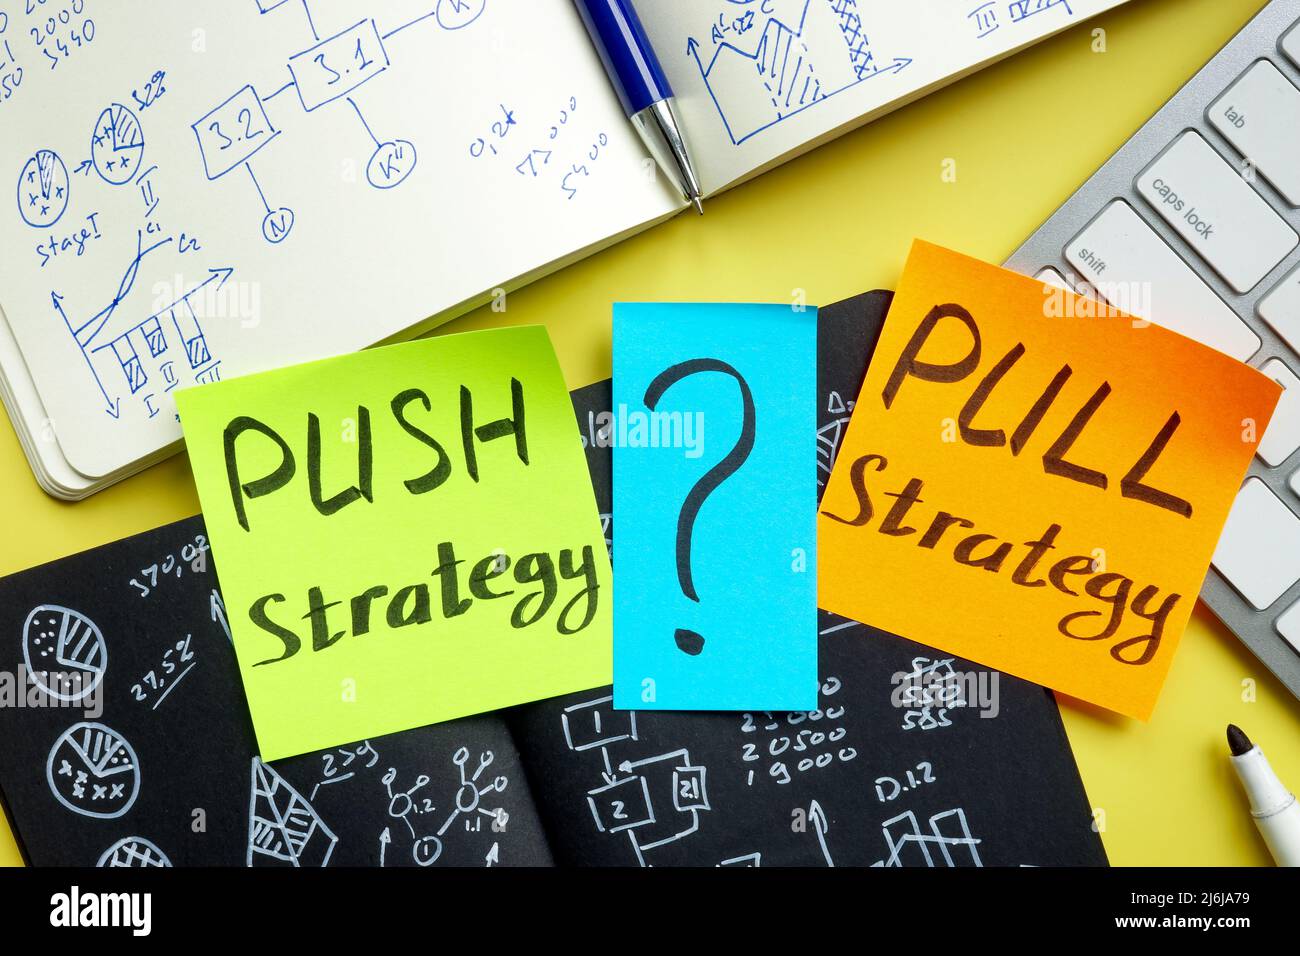 Push or pull strategy in marketing. Notepads and keyboard. Stock Photo